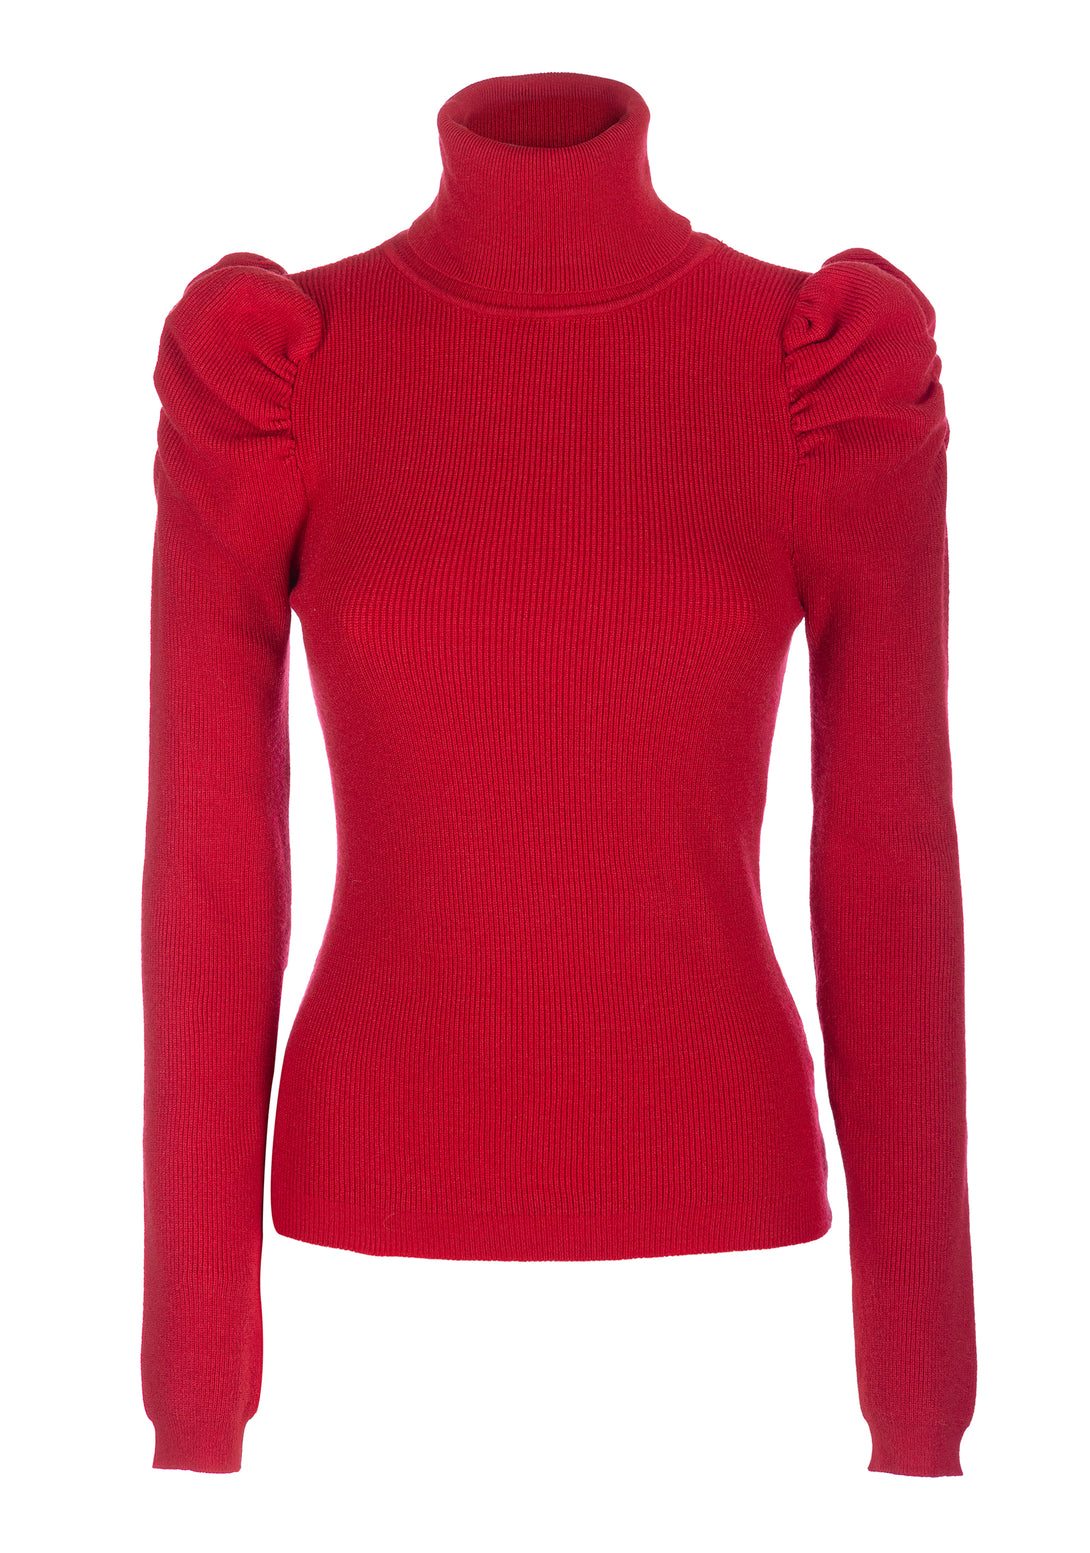 Knitwear slim fit with ribs and high neck Fracomina FI22WT7006K51301-377